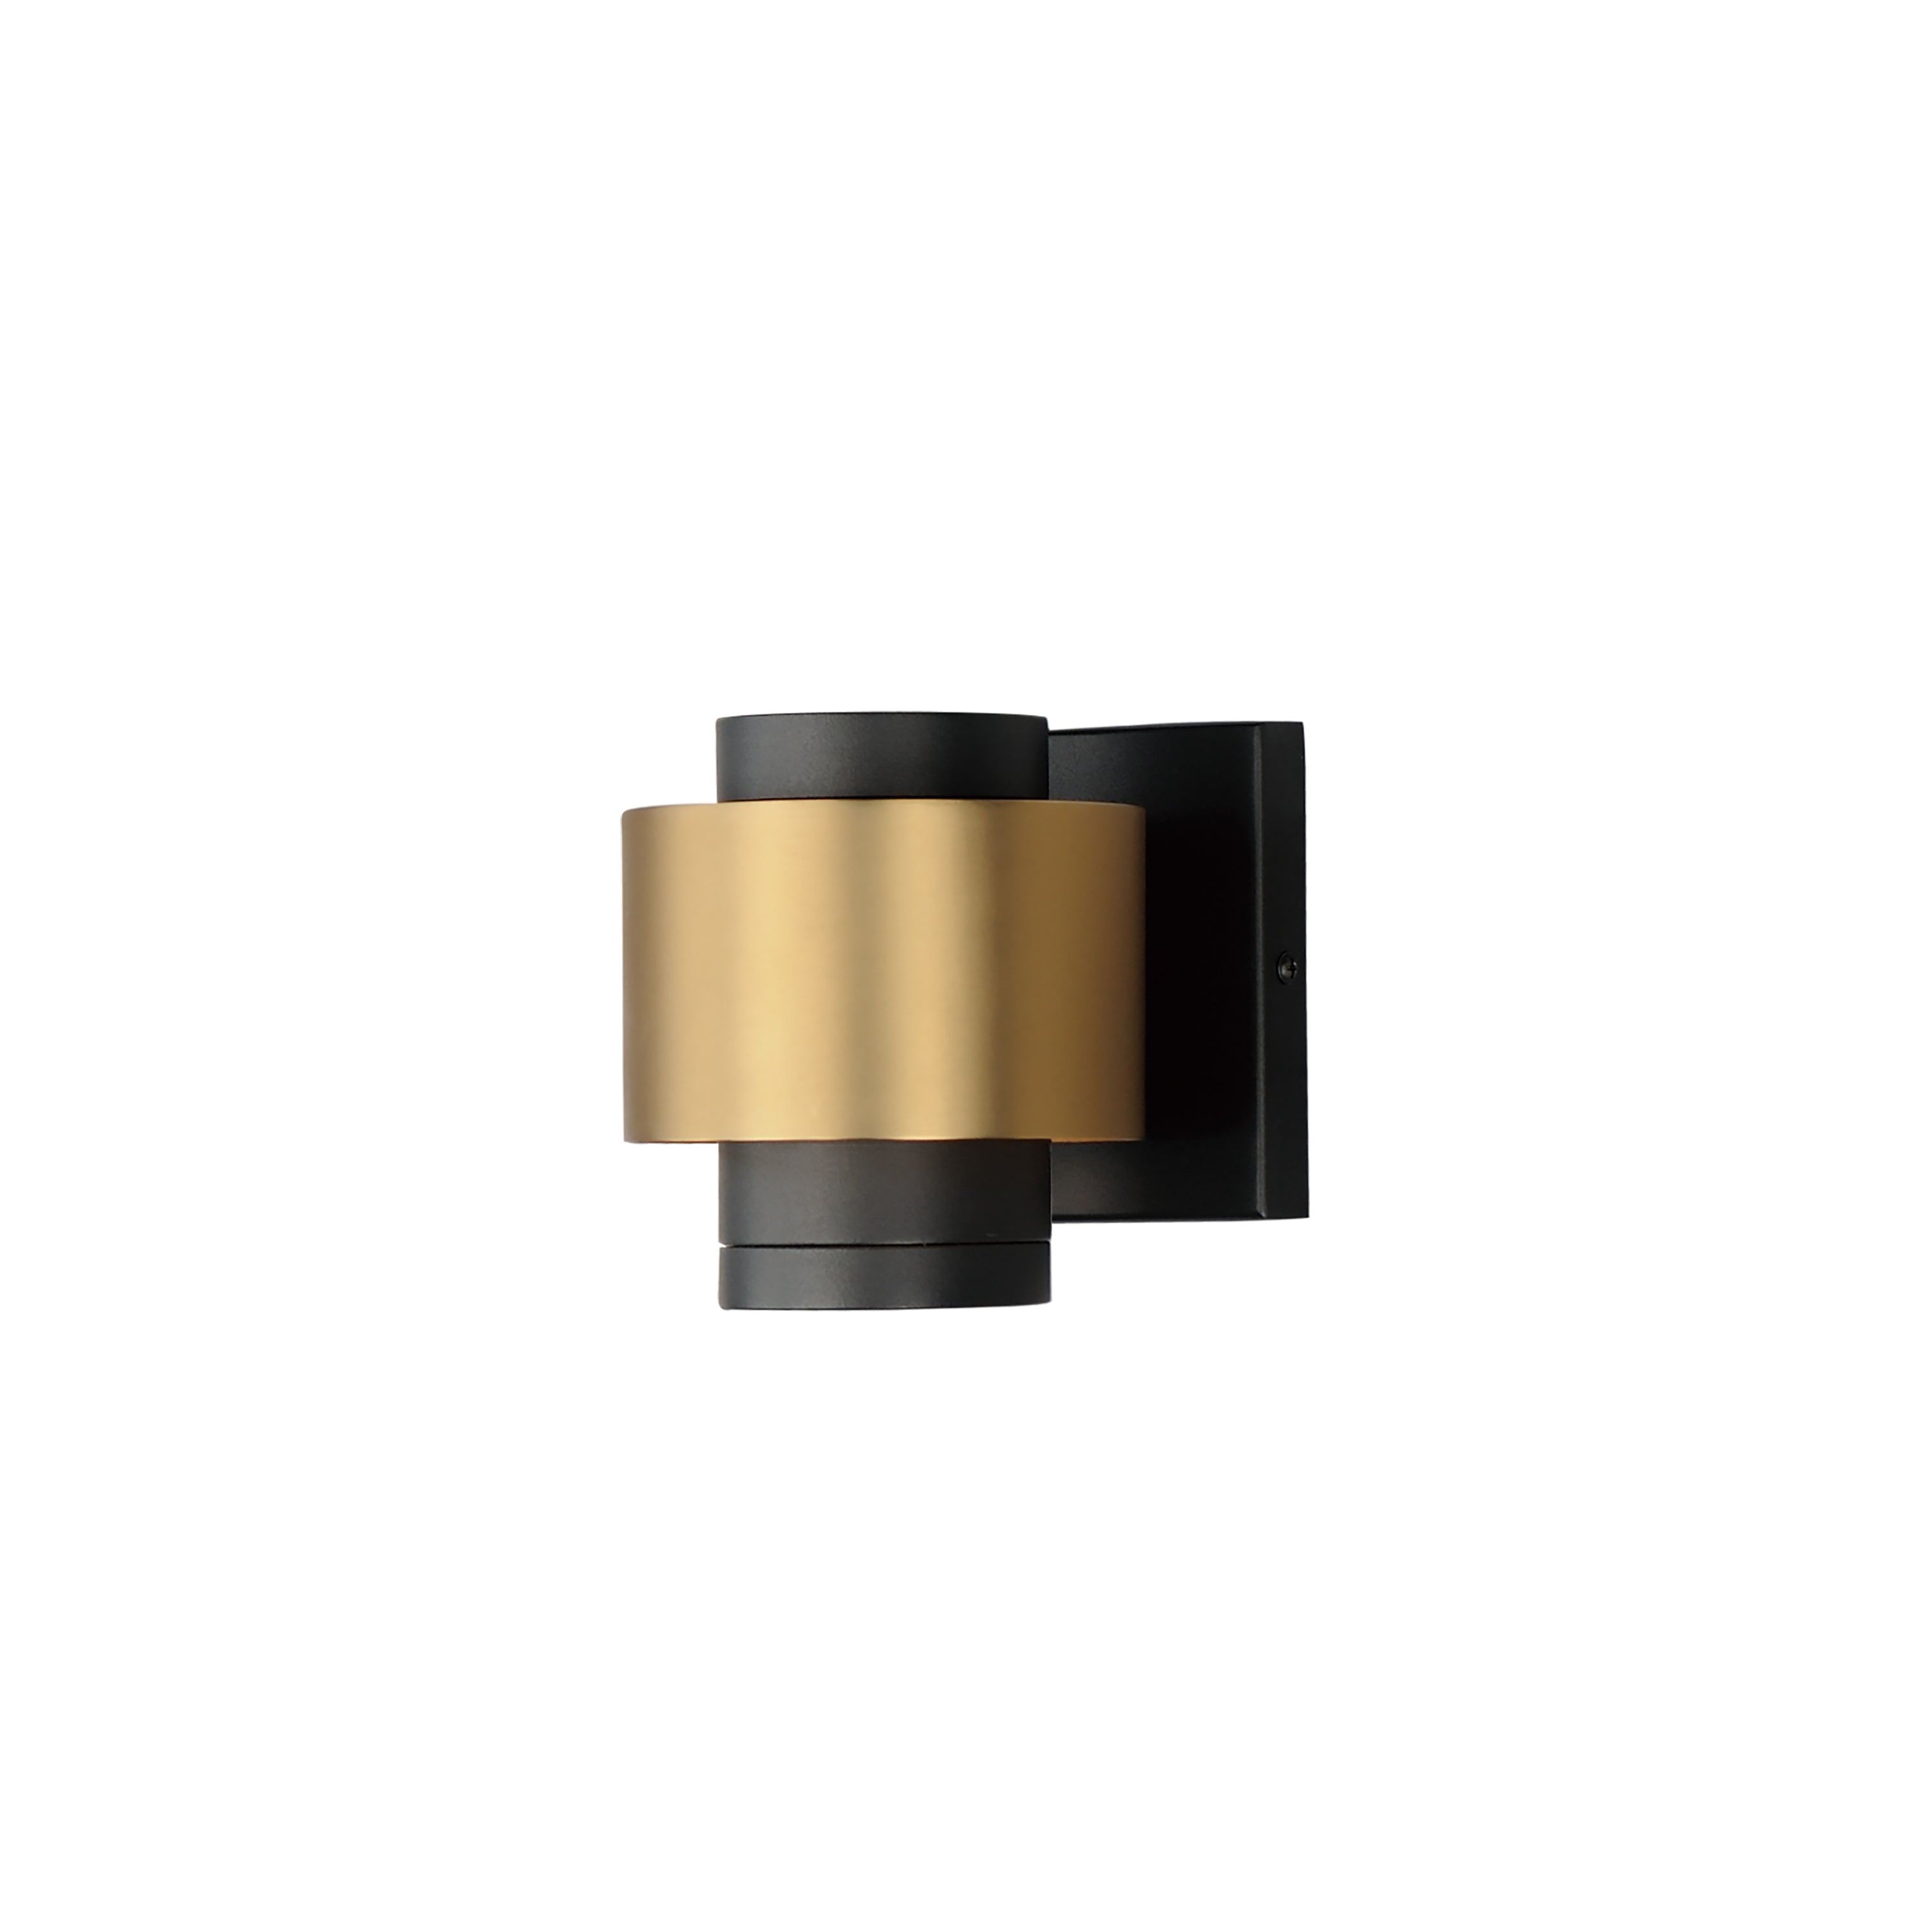 Reveal Outdoor-Outdoor Wall Mount Outdoor l Wall ET2 x5x5.25 Black / Gold 